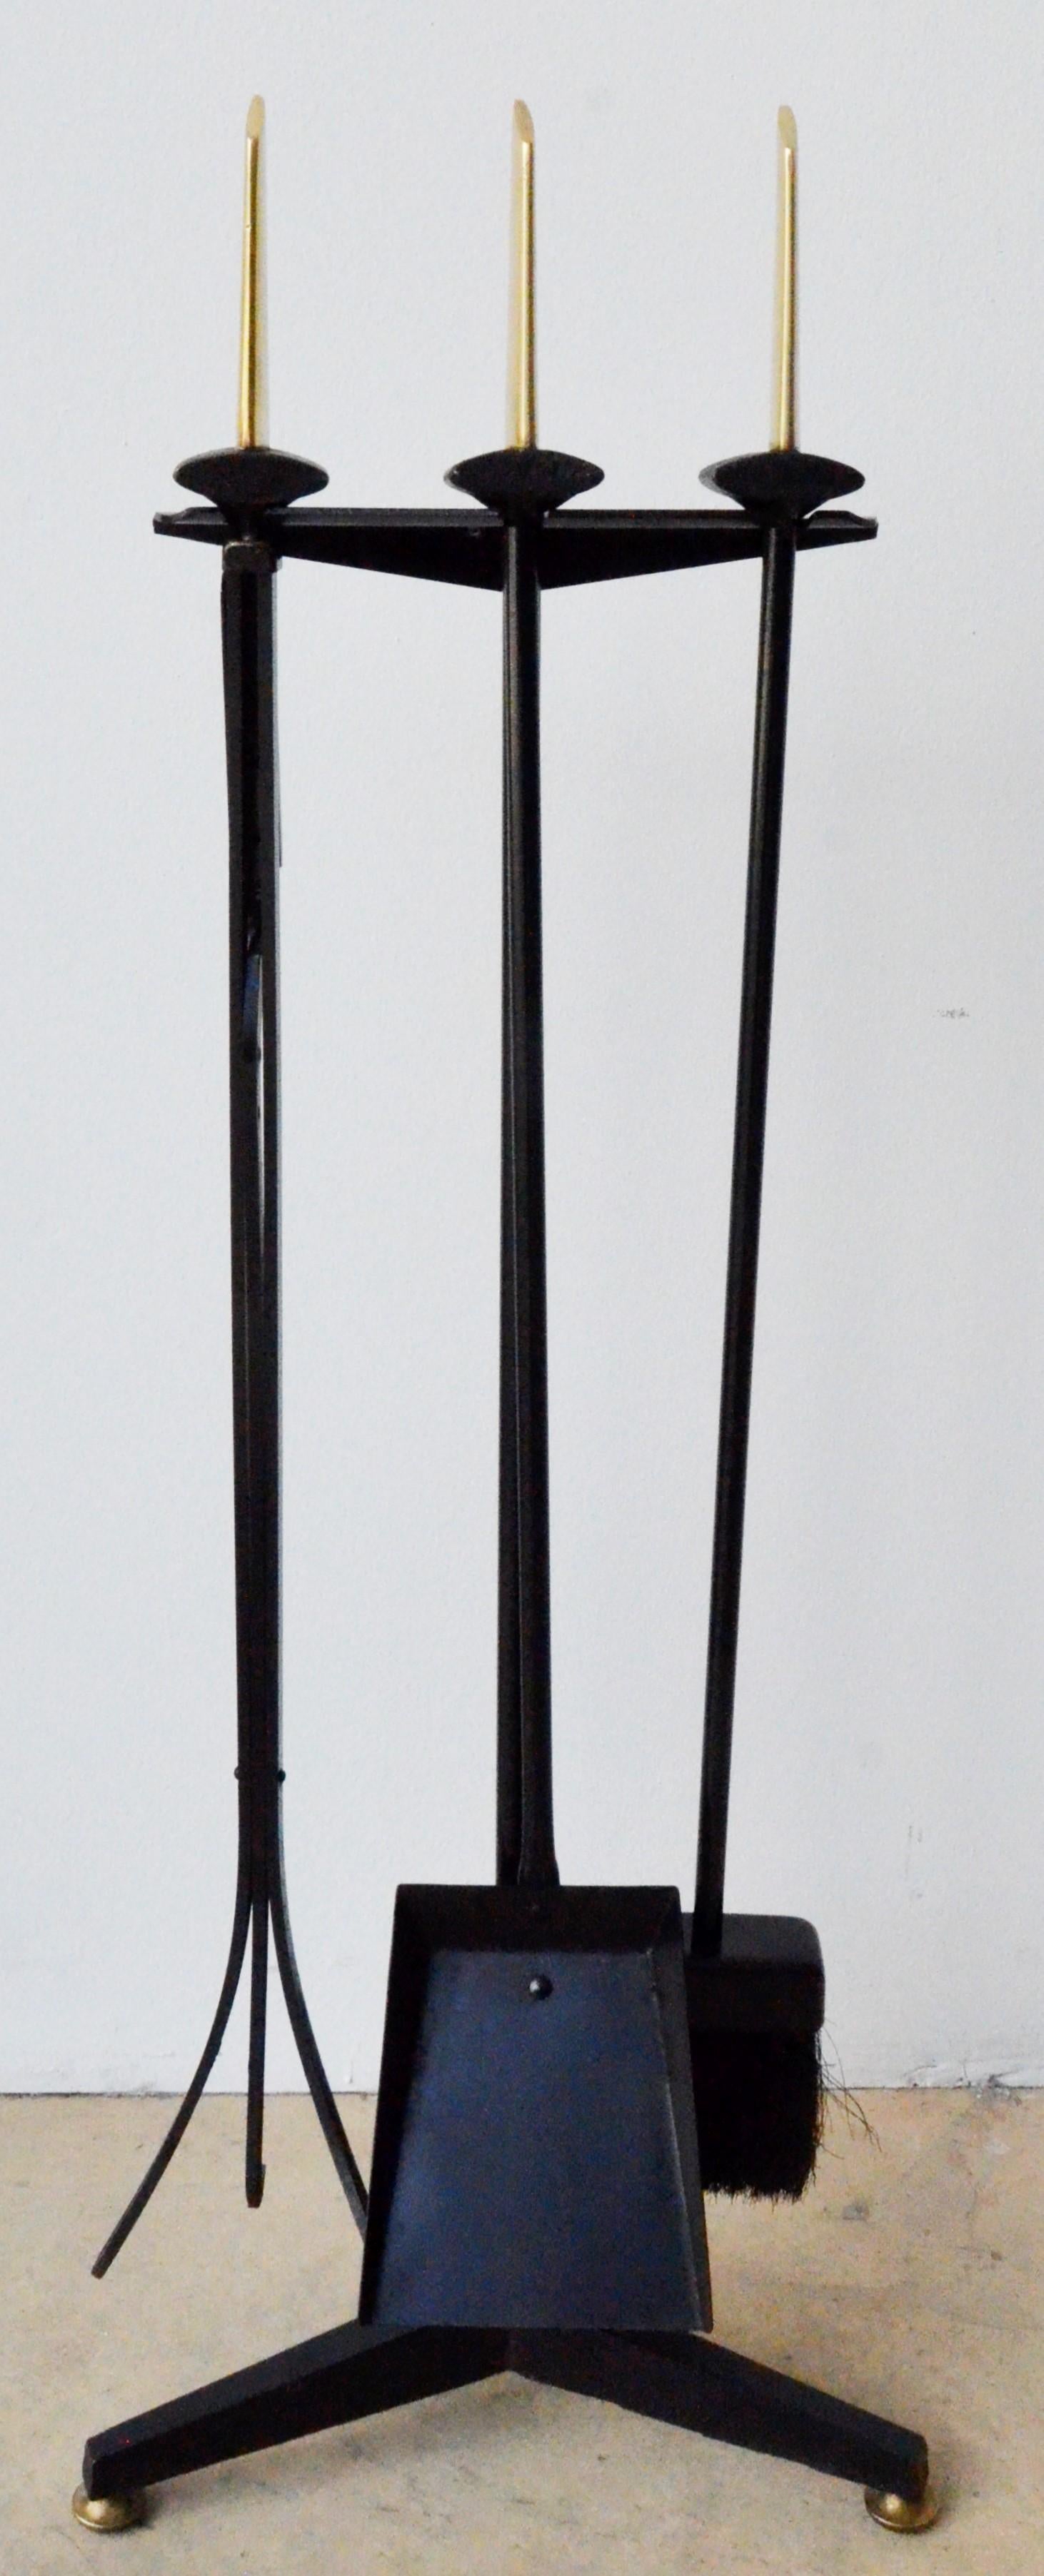 Offered is a set of four (three tools and holder) Mid-Century Modern Donald Deskey black wrought iron with brass handles three fireplace tools with stand. The offered fireplace set was designed and manufactured during the 1950s. The brass handles at